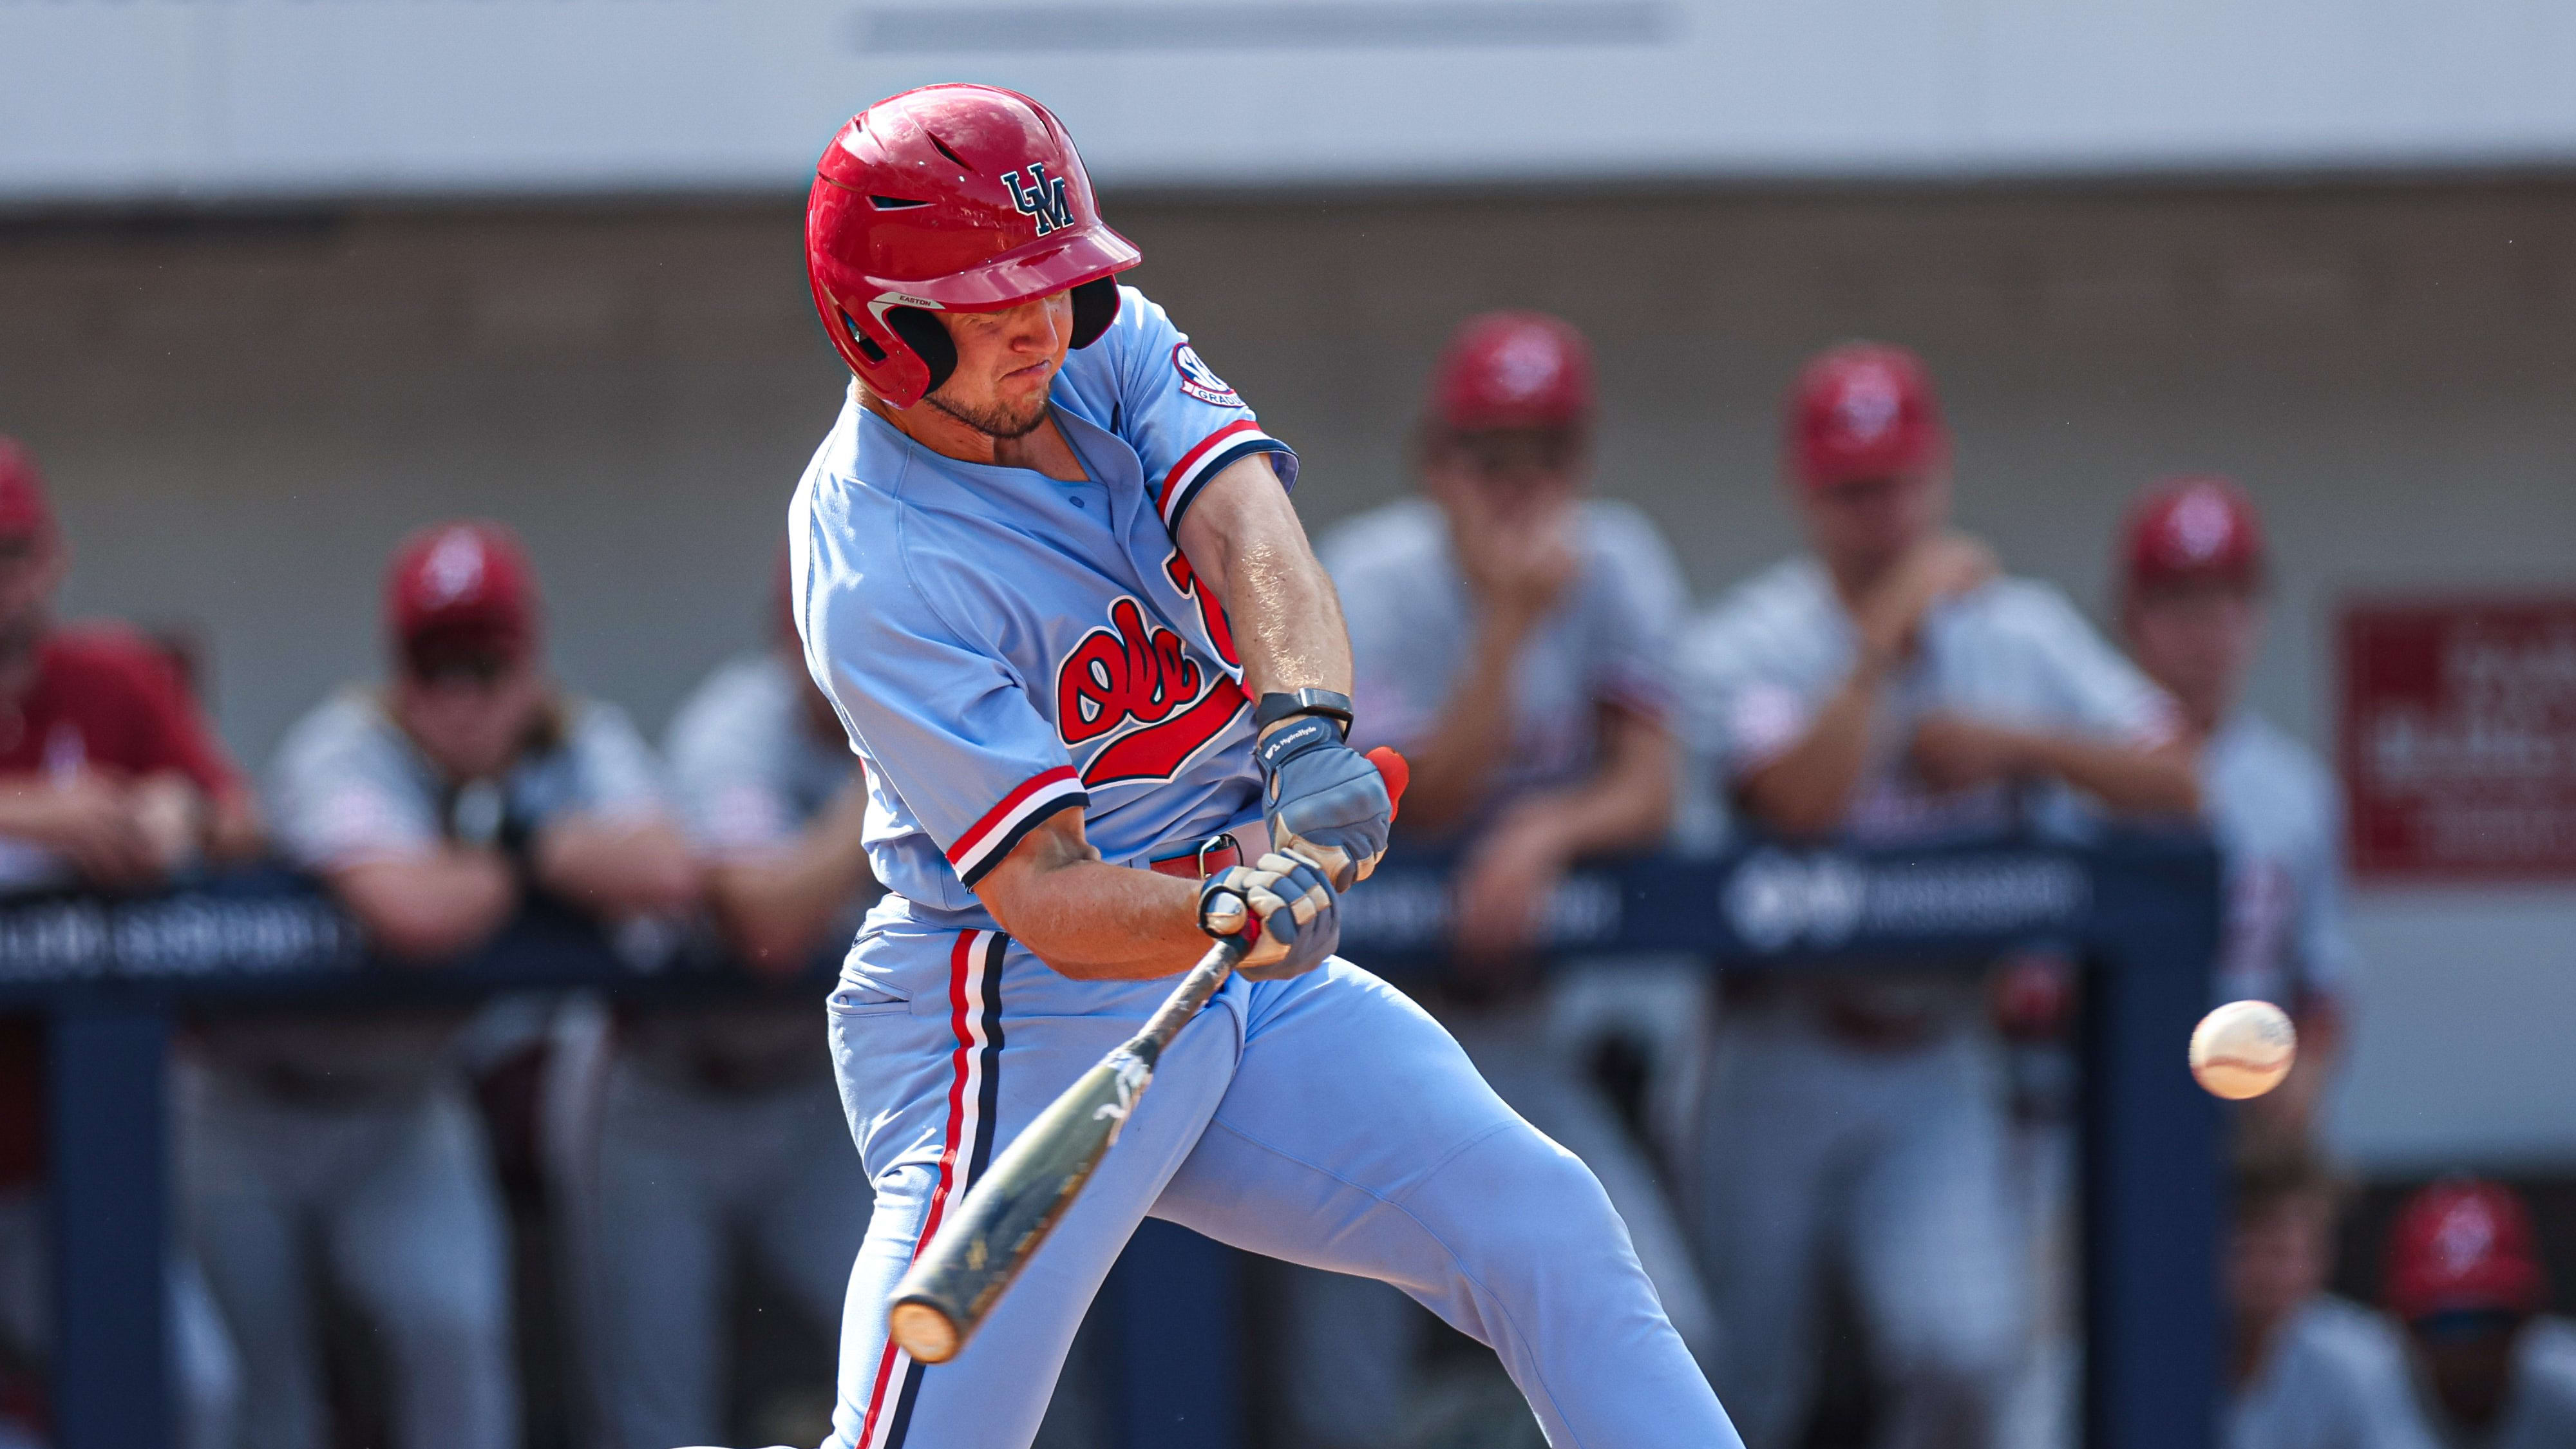 Alabama Dominates Ole Miss in Decisive Game 3 with 10-3 Victory